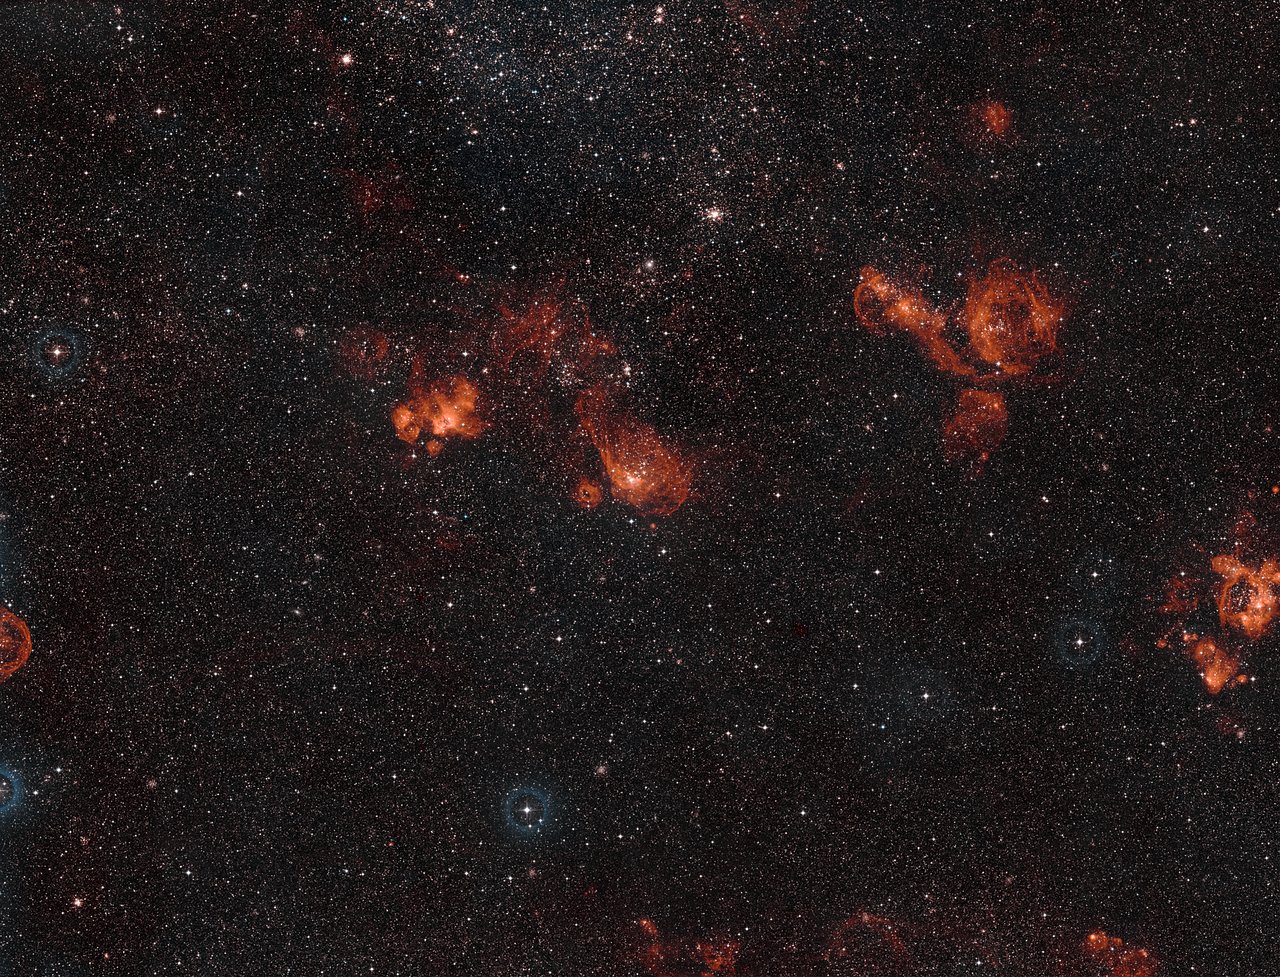 http://www.eso.org/public/archives/images/screen/eso1348c.jpg